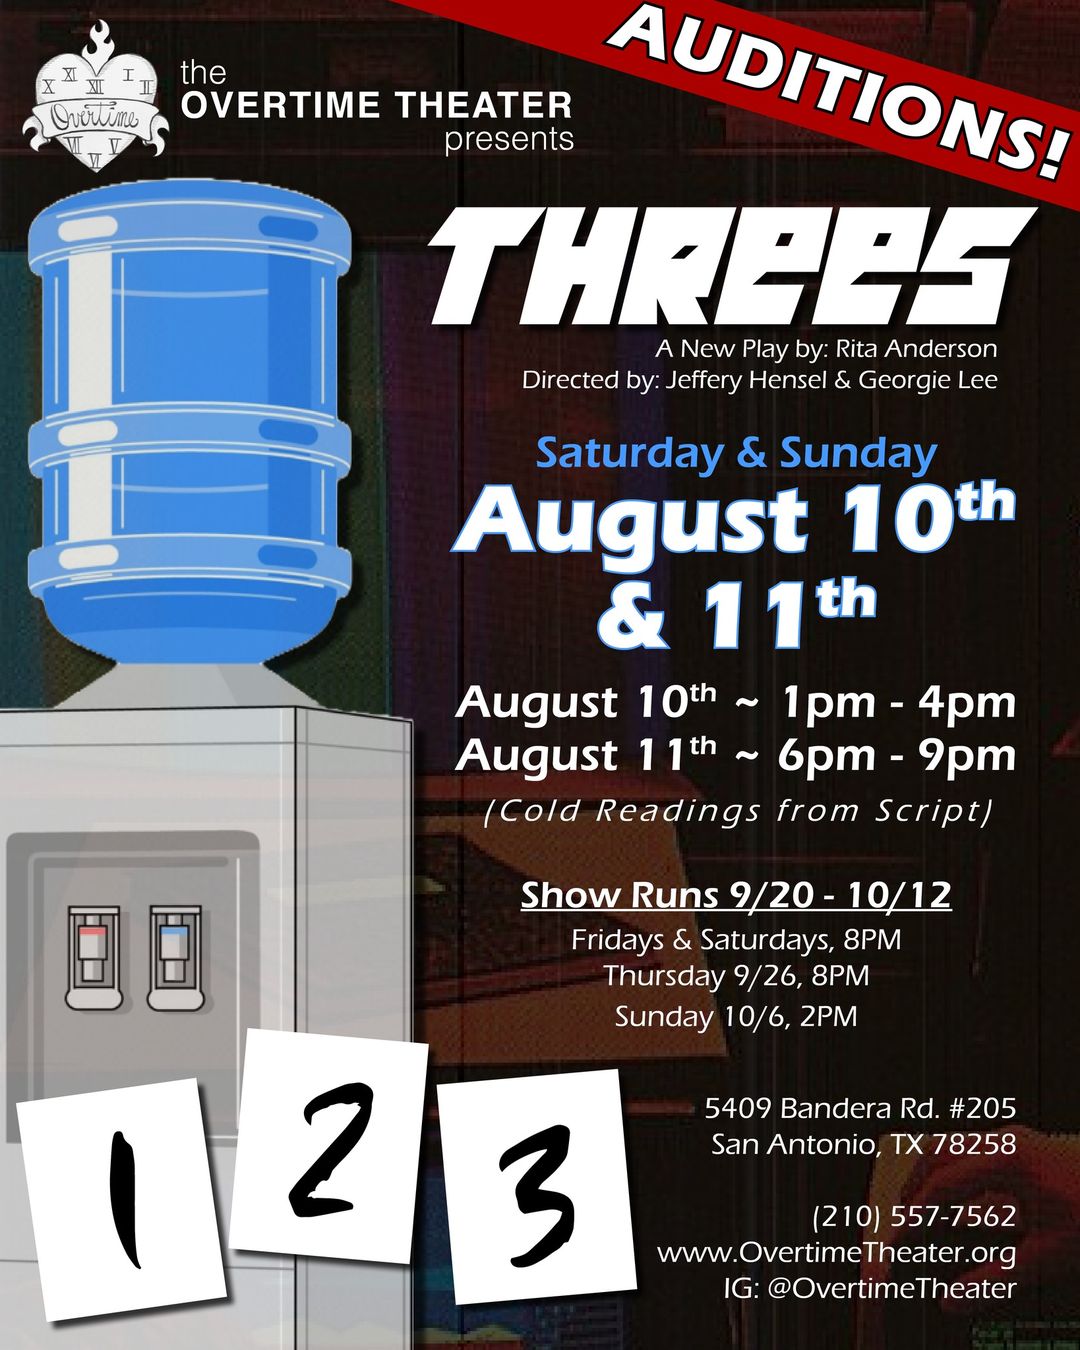 CTX3777. Auditions for Threes by Rita Anderson, Overtime Theater, San Antonio